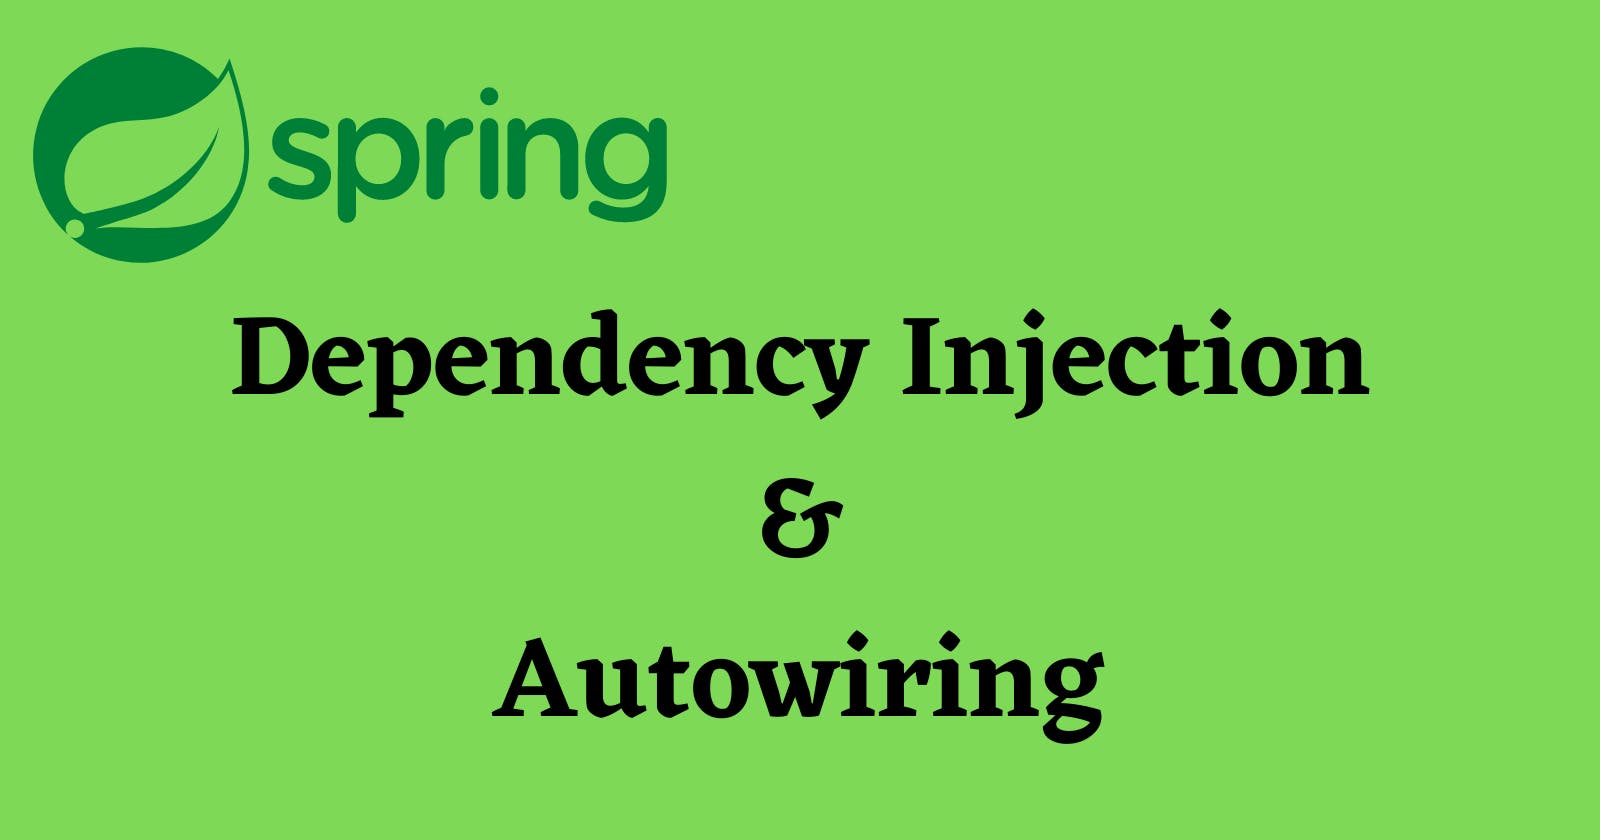 Spring Dependency Injection and Autowiring